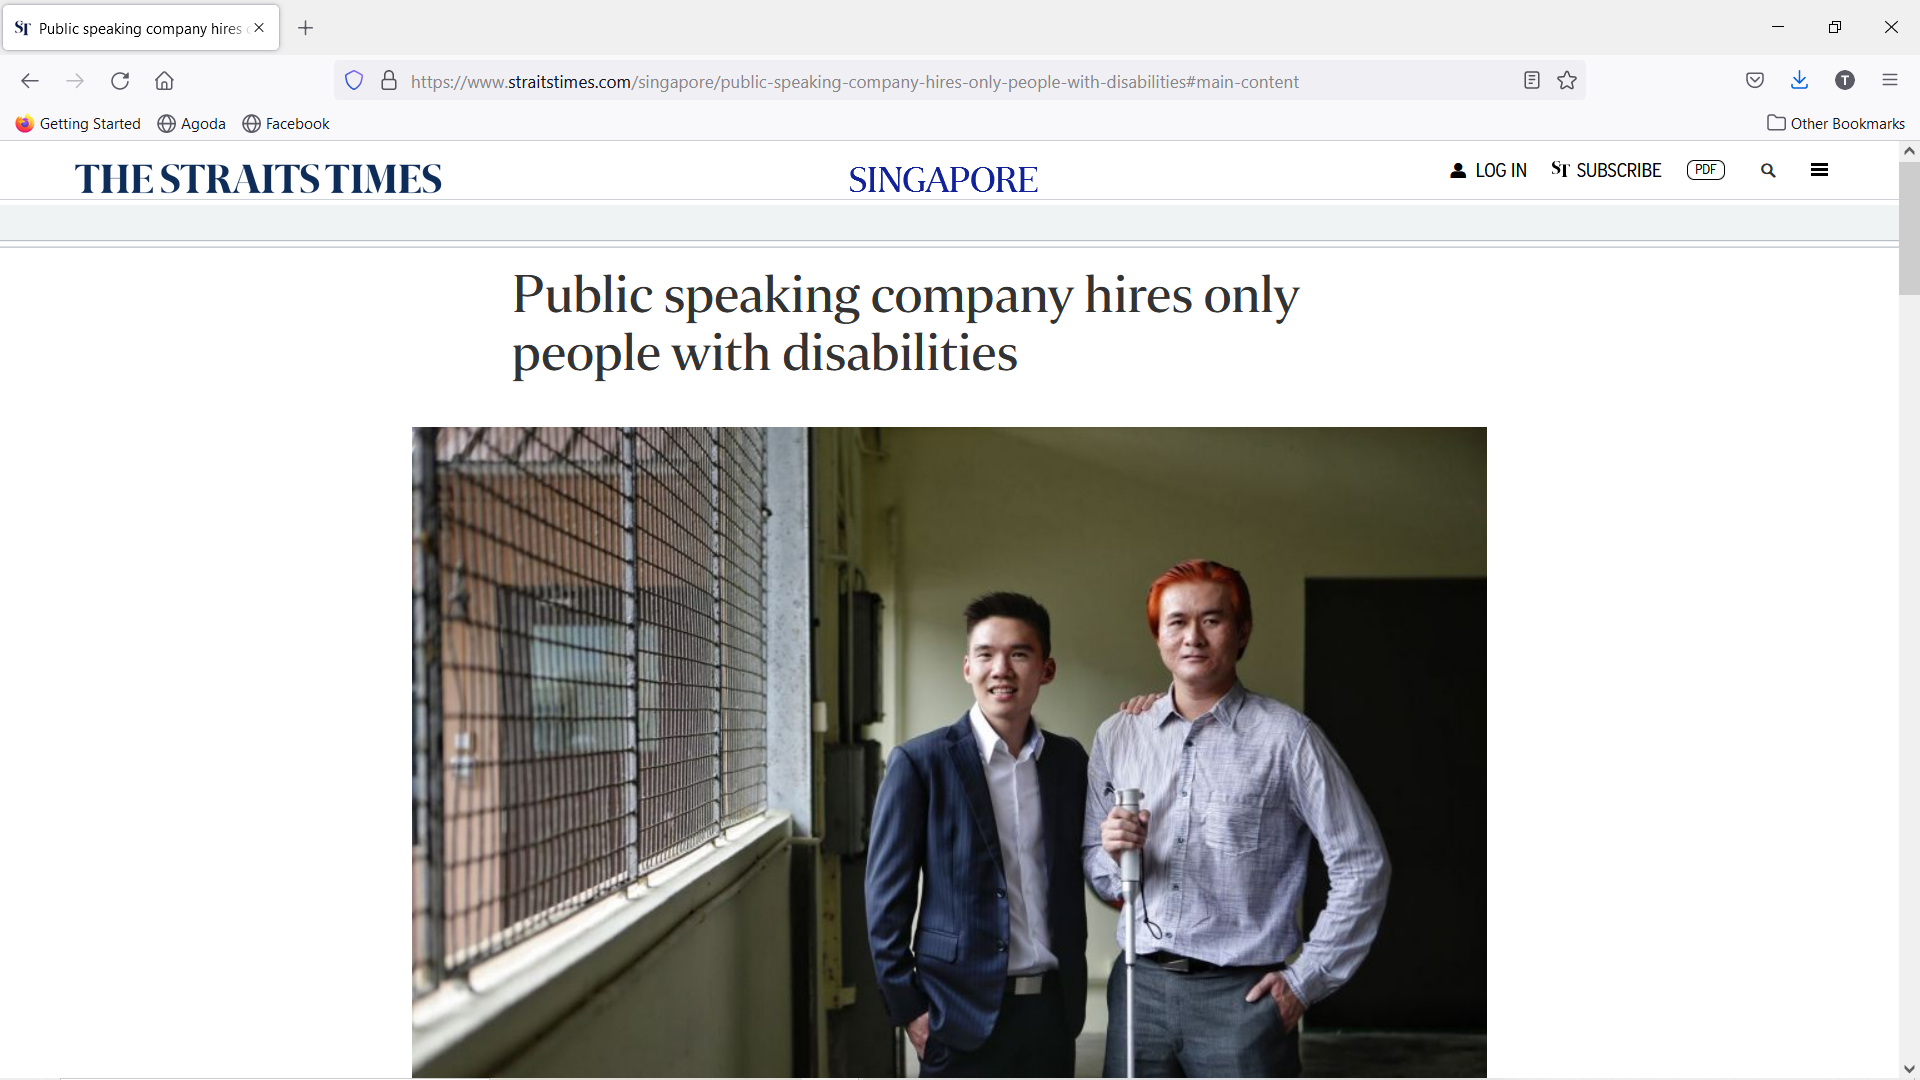 Public speaking company hires only people with disabilities Screenshot